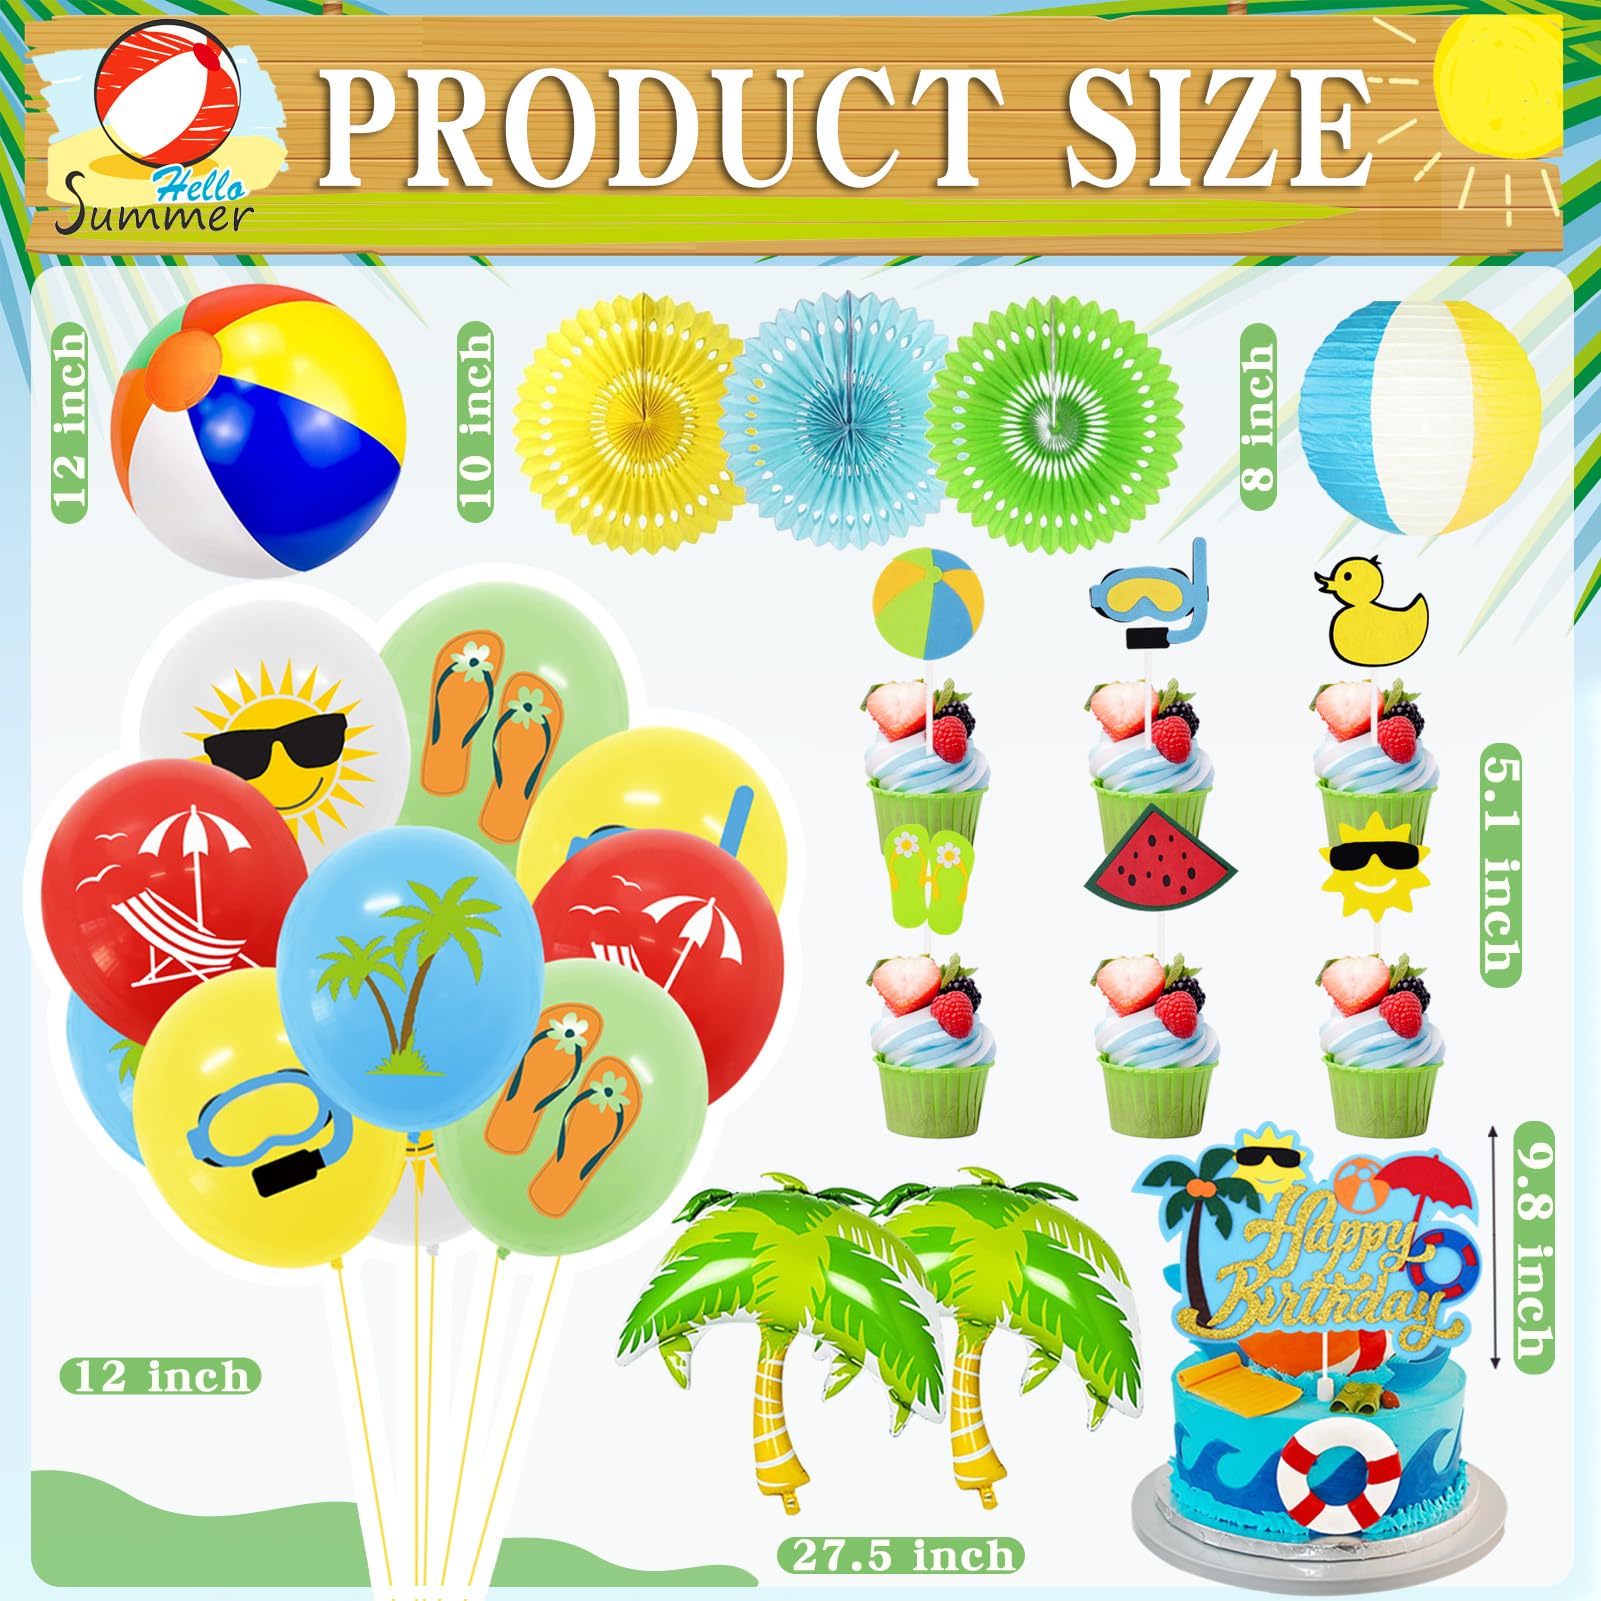 Summer Beach Party Decorations, Beach Theme Pool Birthday Party Supplies Including Birthday Banner Beach Garland Paper Lanterns Beach Balls Cupcake Toppers Balloons Set for Hawaiian Luau Party